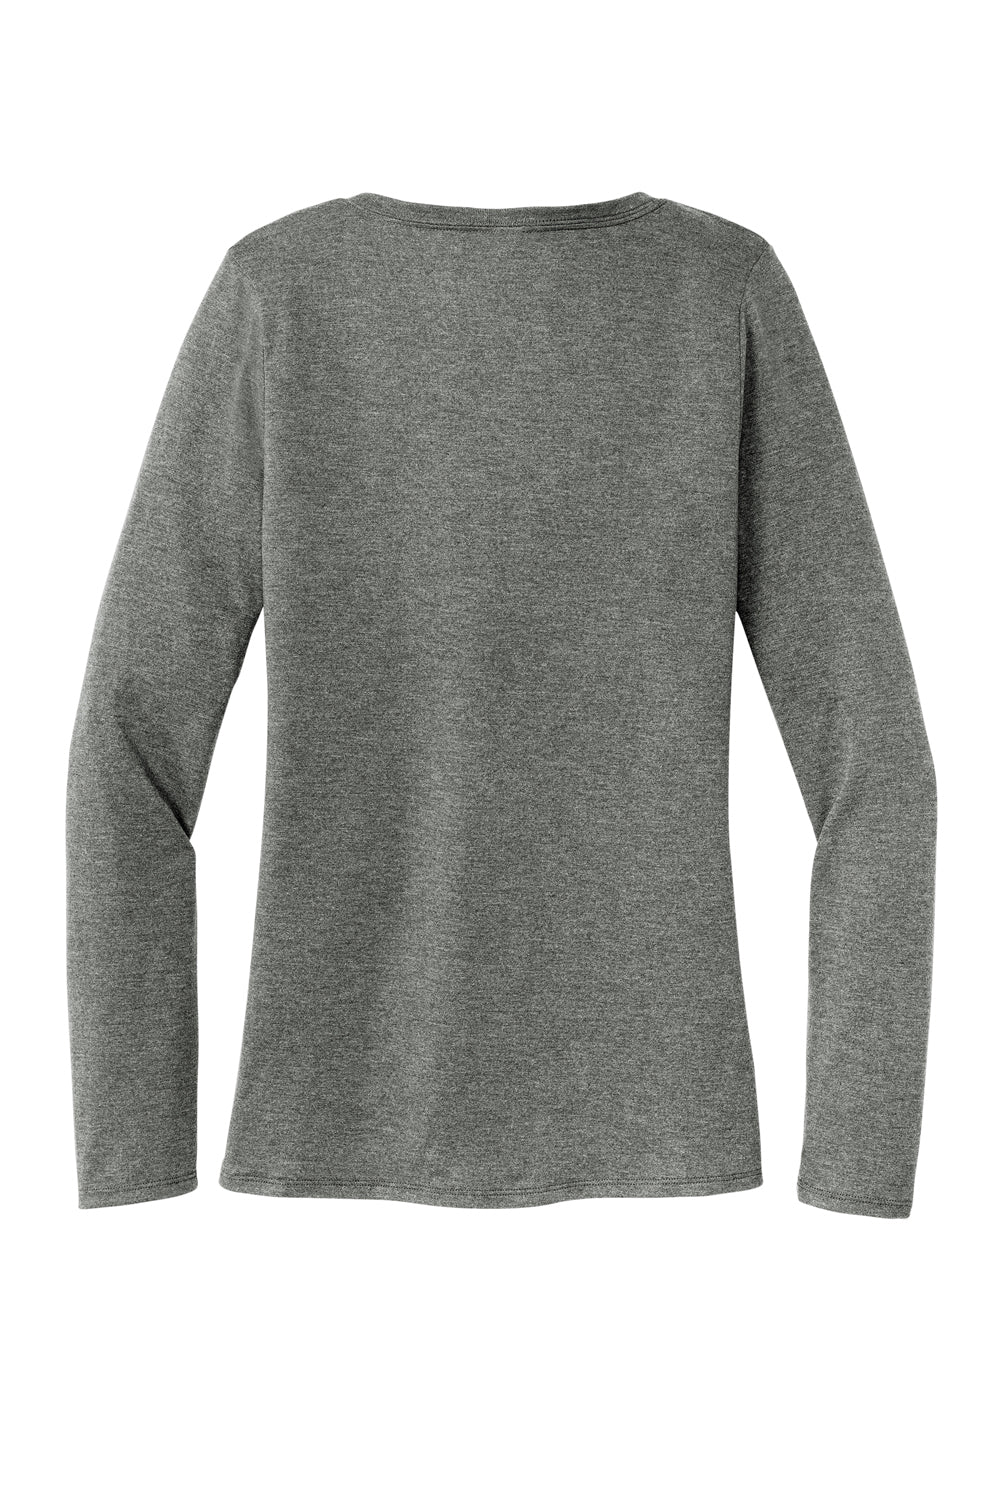 District DT135 Womens Perfect Tri Long Sleeve V-Neck T-Shirt Heather Charcoal Grey Flat Back